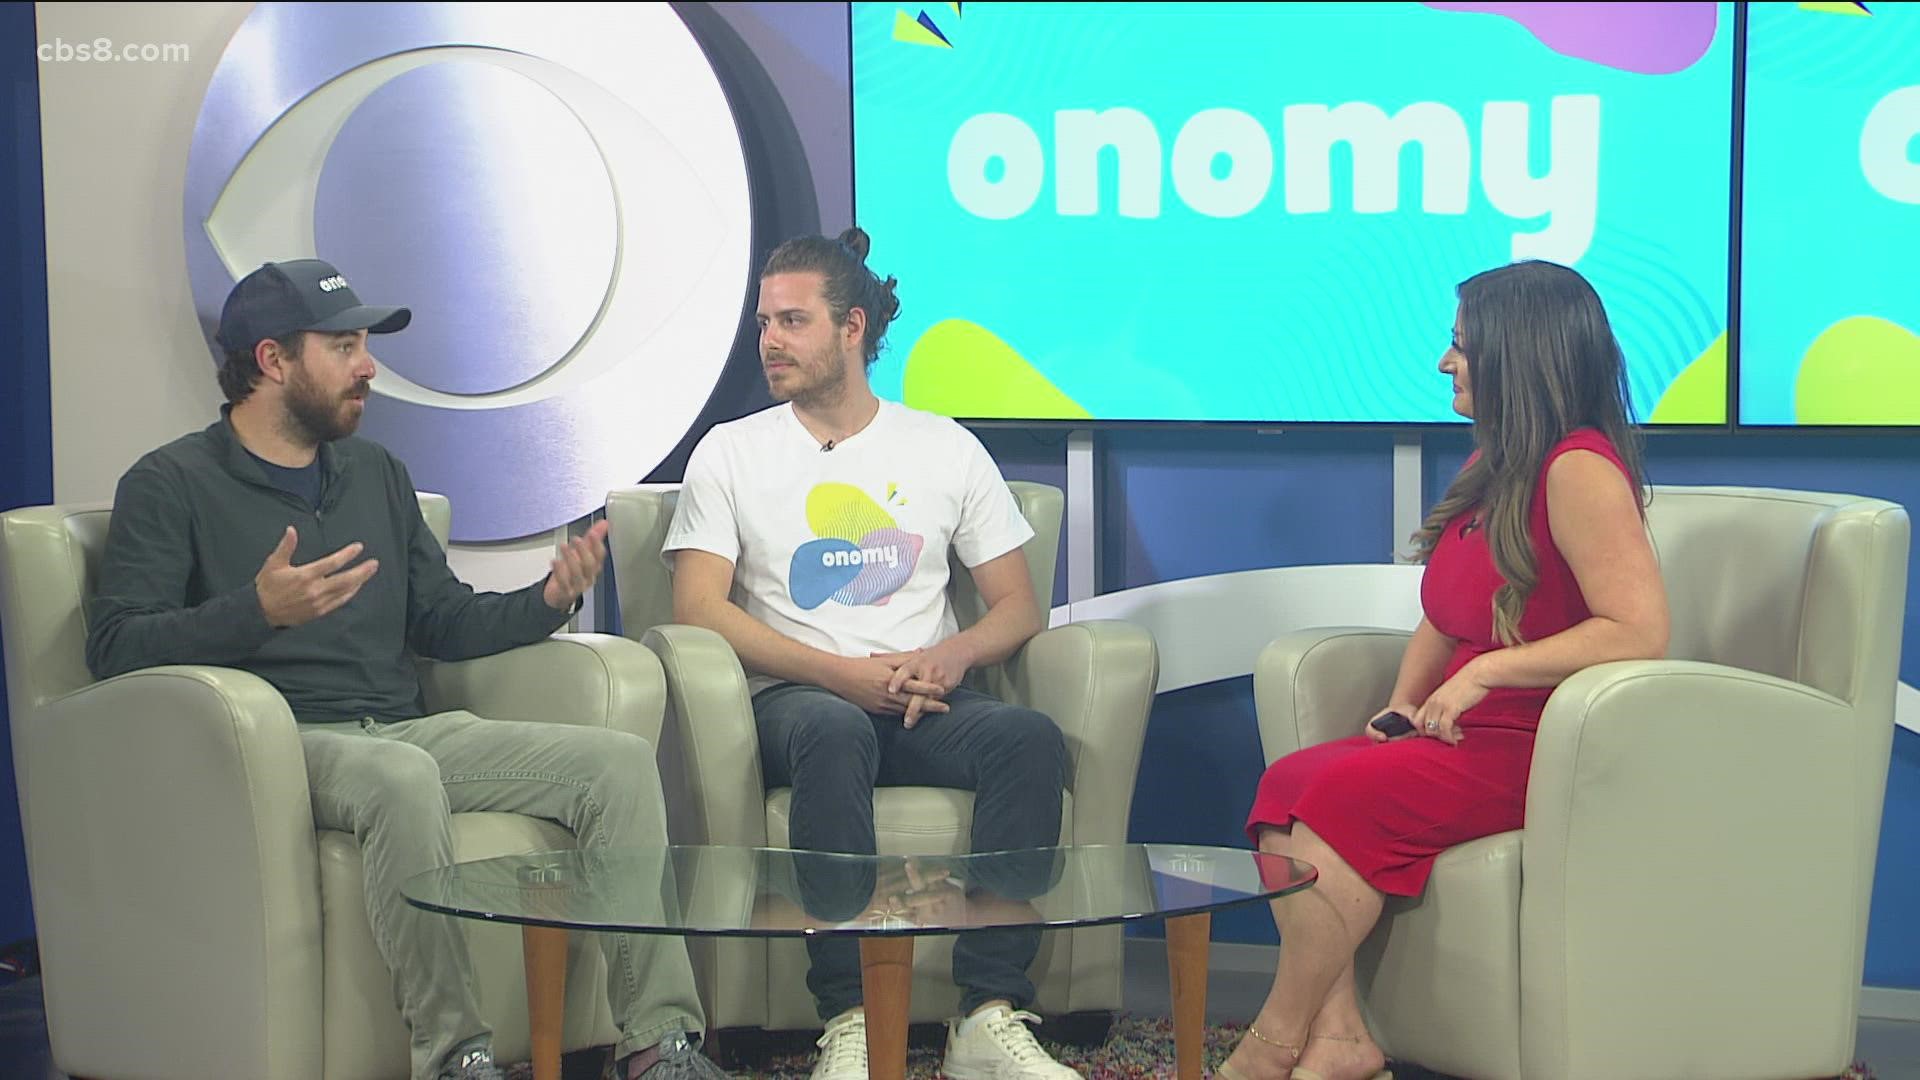 Co-founders of Onomy, Sam Abrahamson & Sam Rowen talked about their app and website and what they hope the future has in store